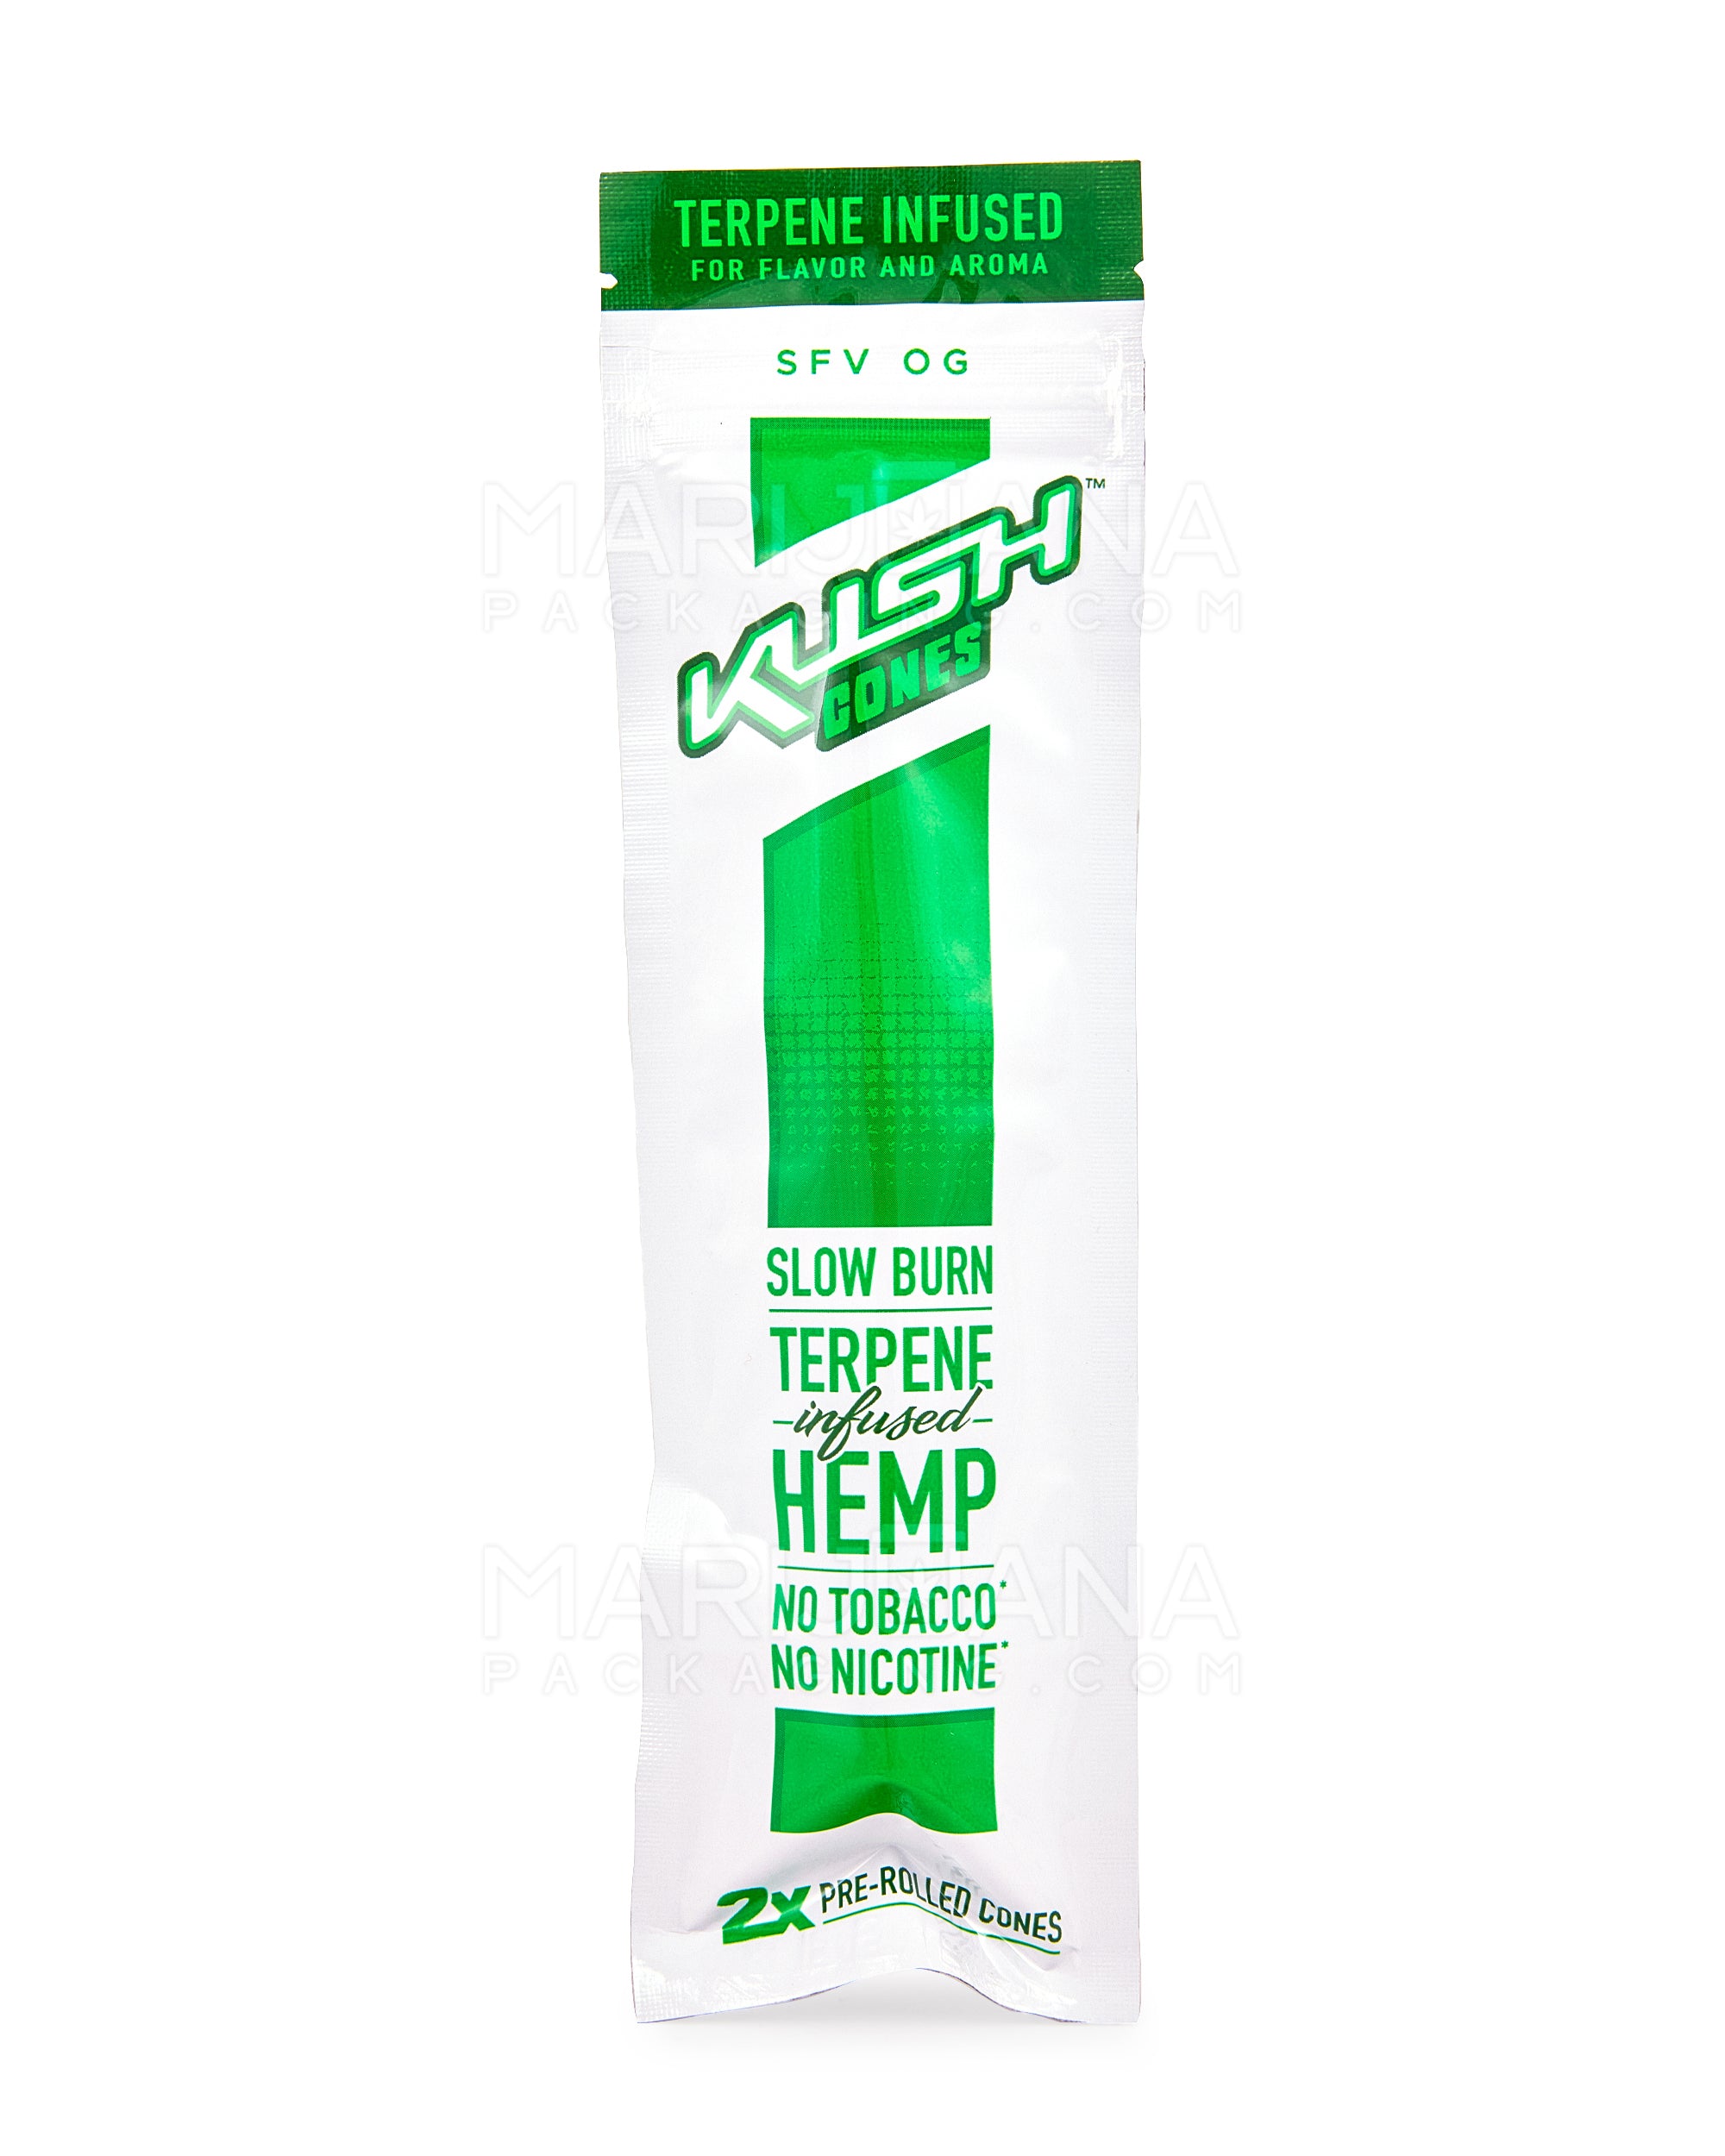 KUSH | 'Retail Display' Terpene Infused Herbal Conical Wraps | 160mm - SFV OG - 12 Count - 2